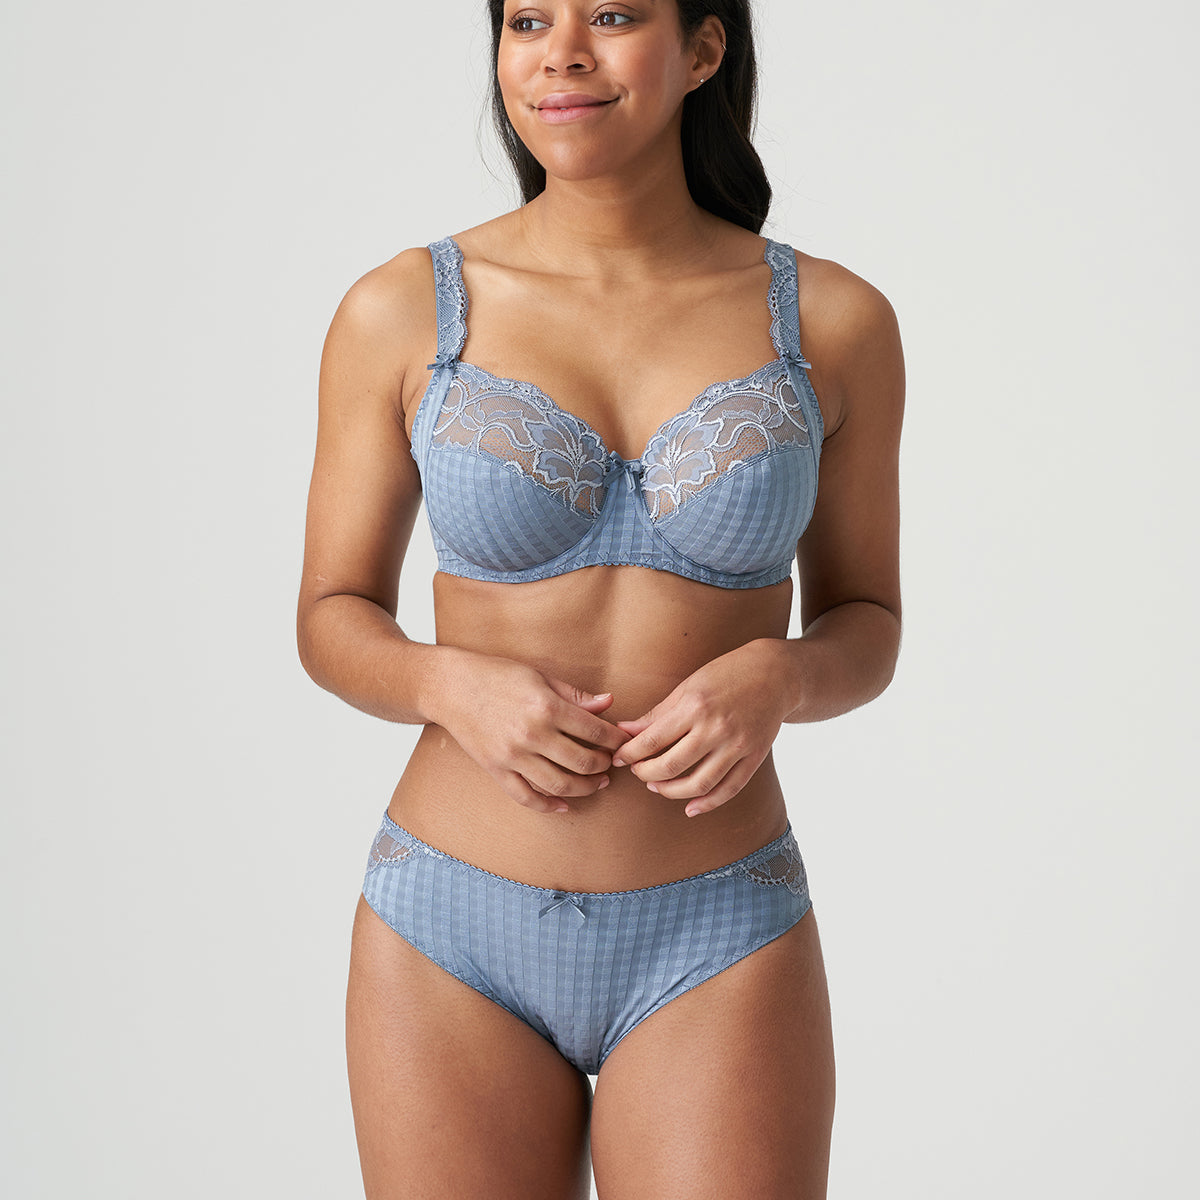 Featuring: Madison By Prima Donna, Our Blog